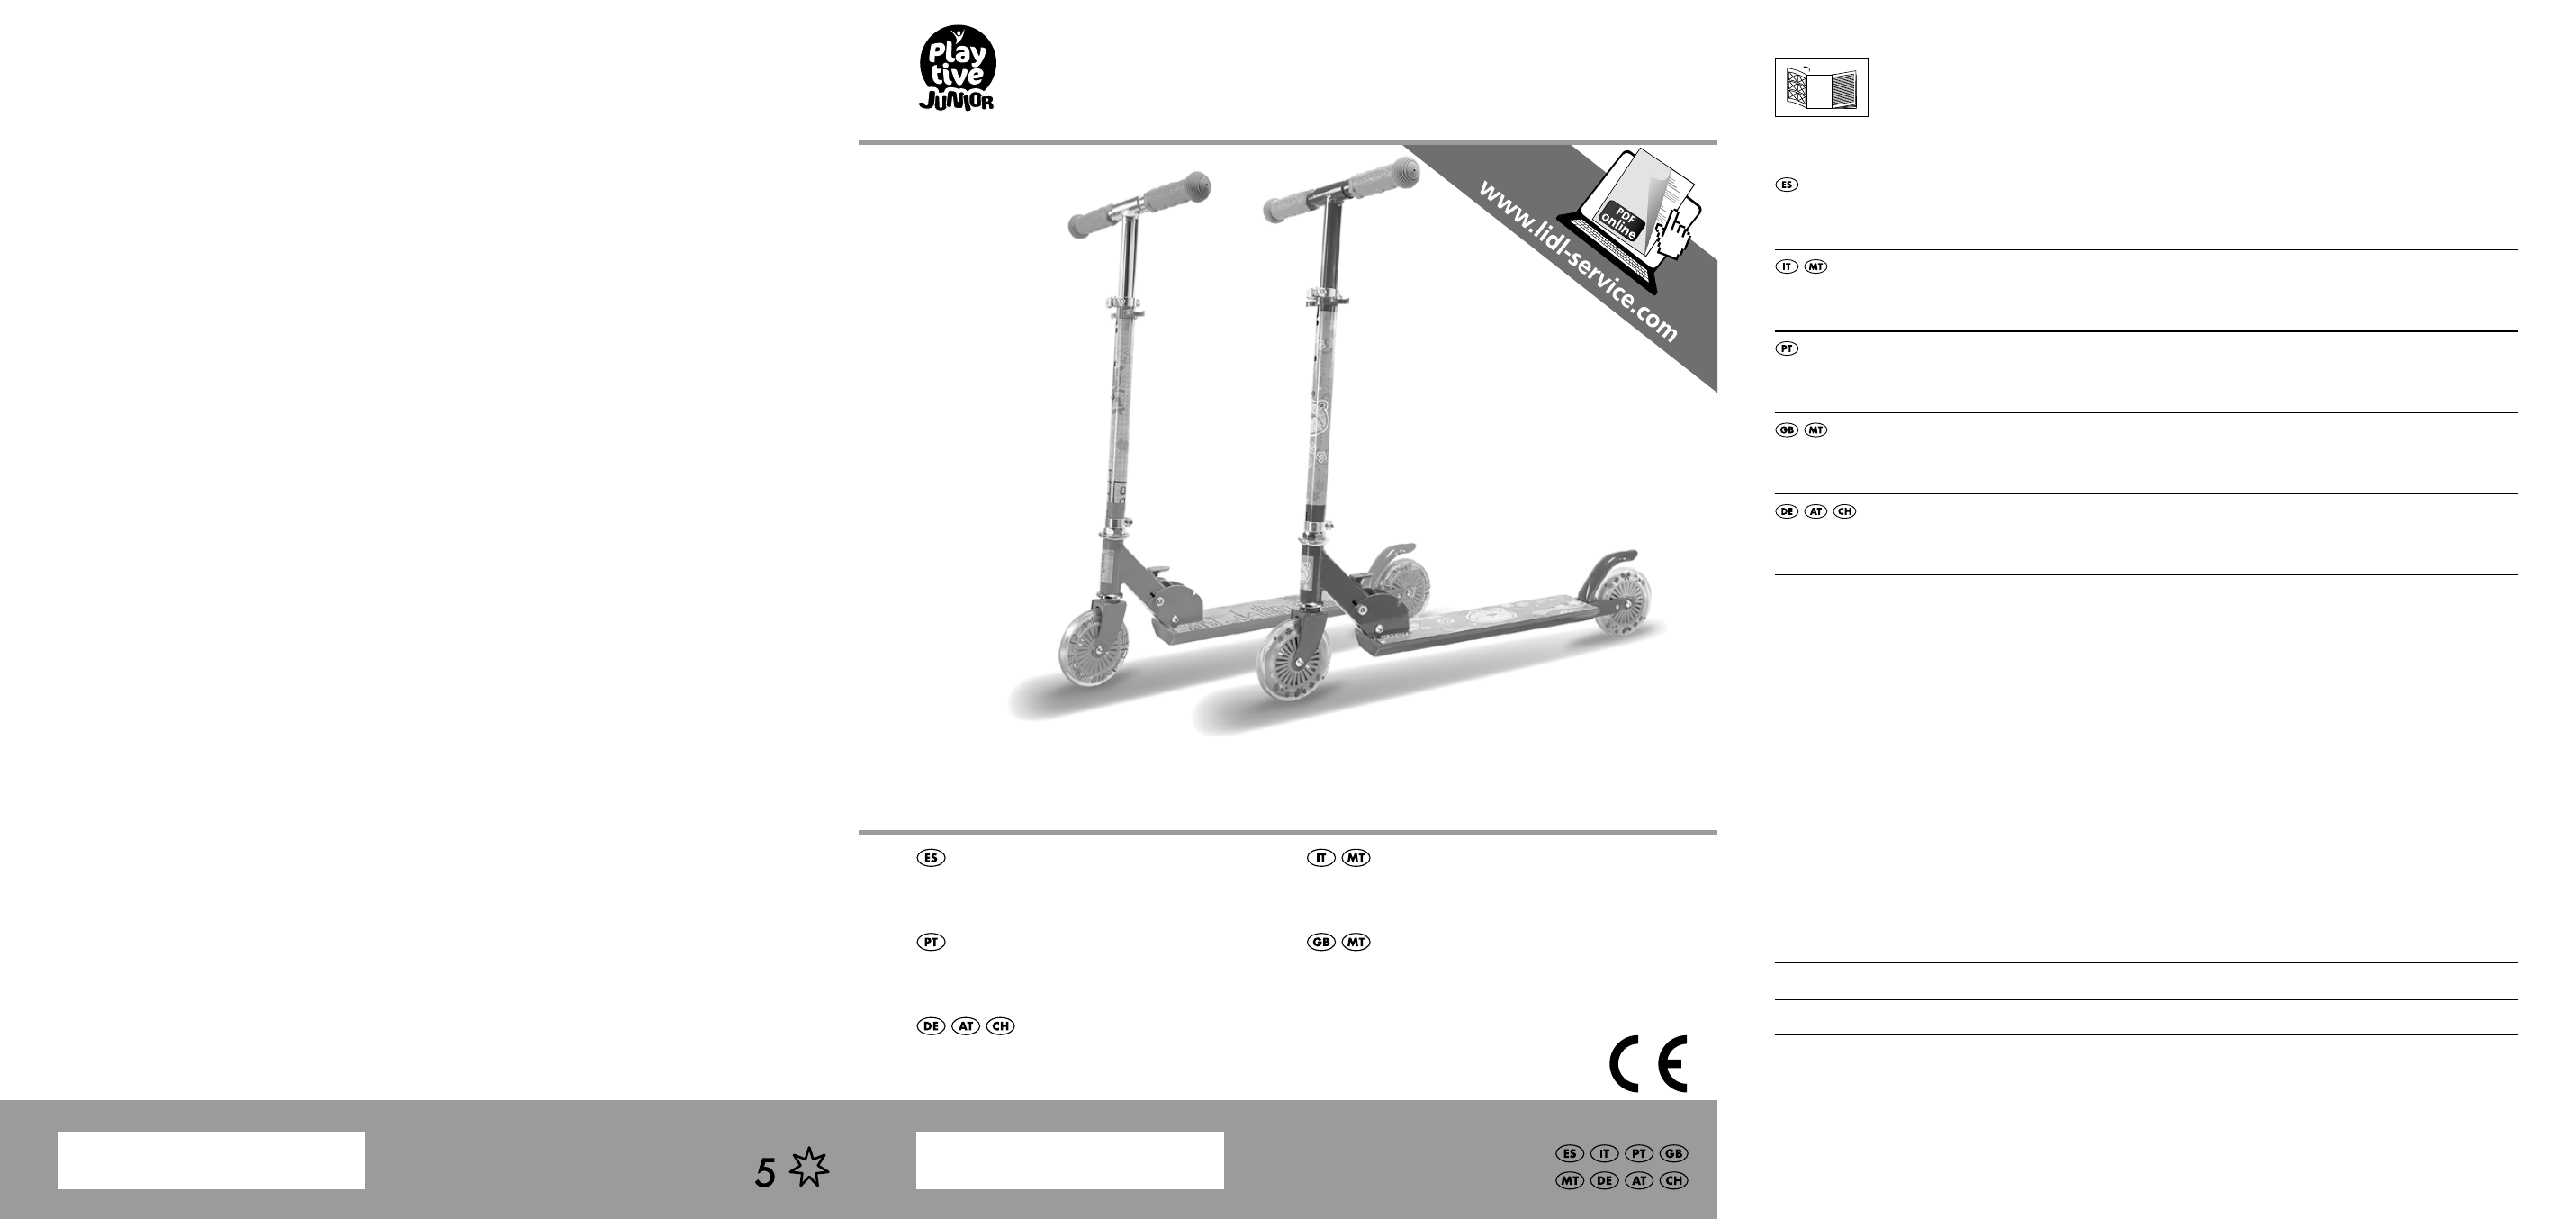 Playtive Scooter User Manual | 18 pages